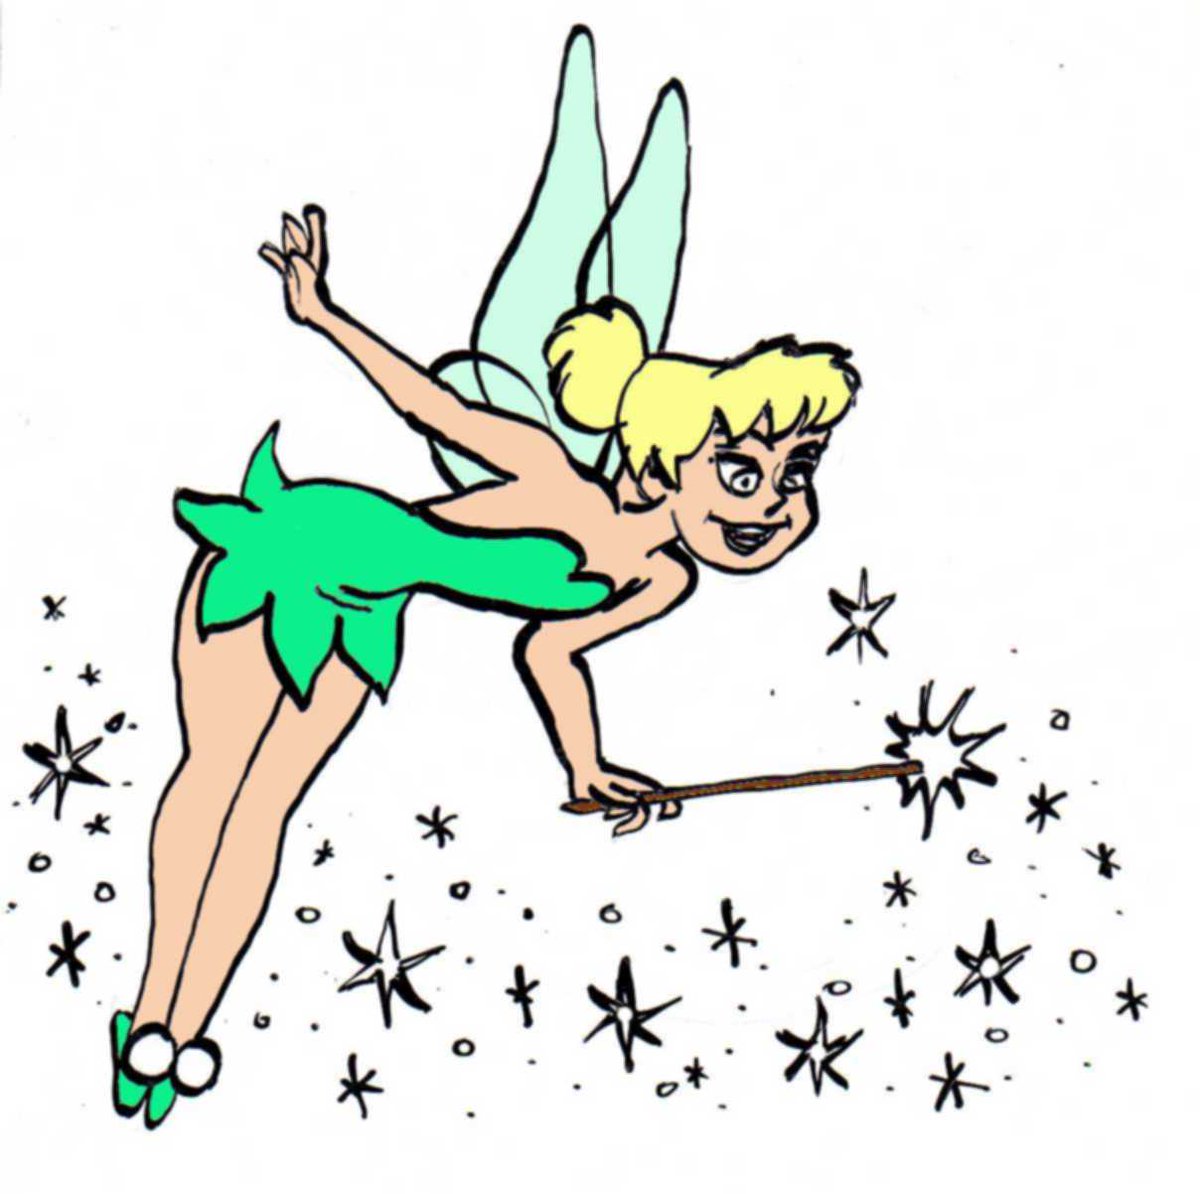 Who wants more #sparkle from #tinkerbell ?
#féeclochette #inktober #inktober2023 #inktober2023day28